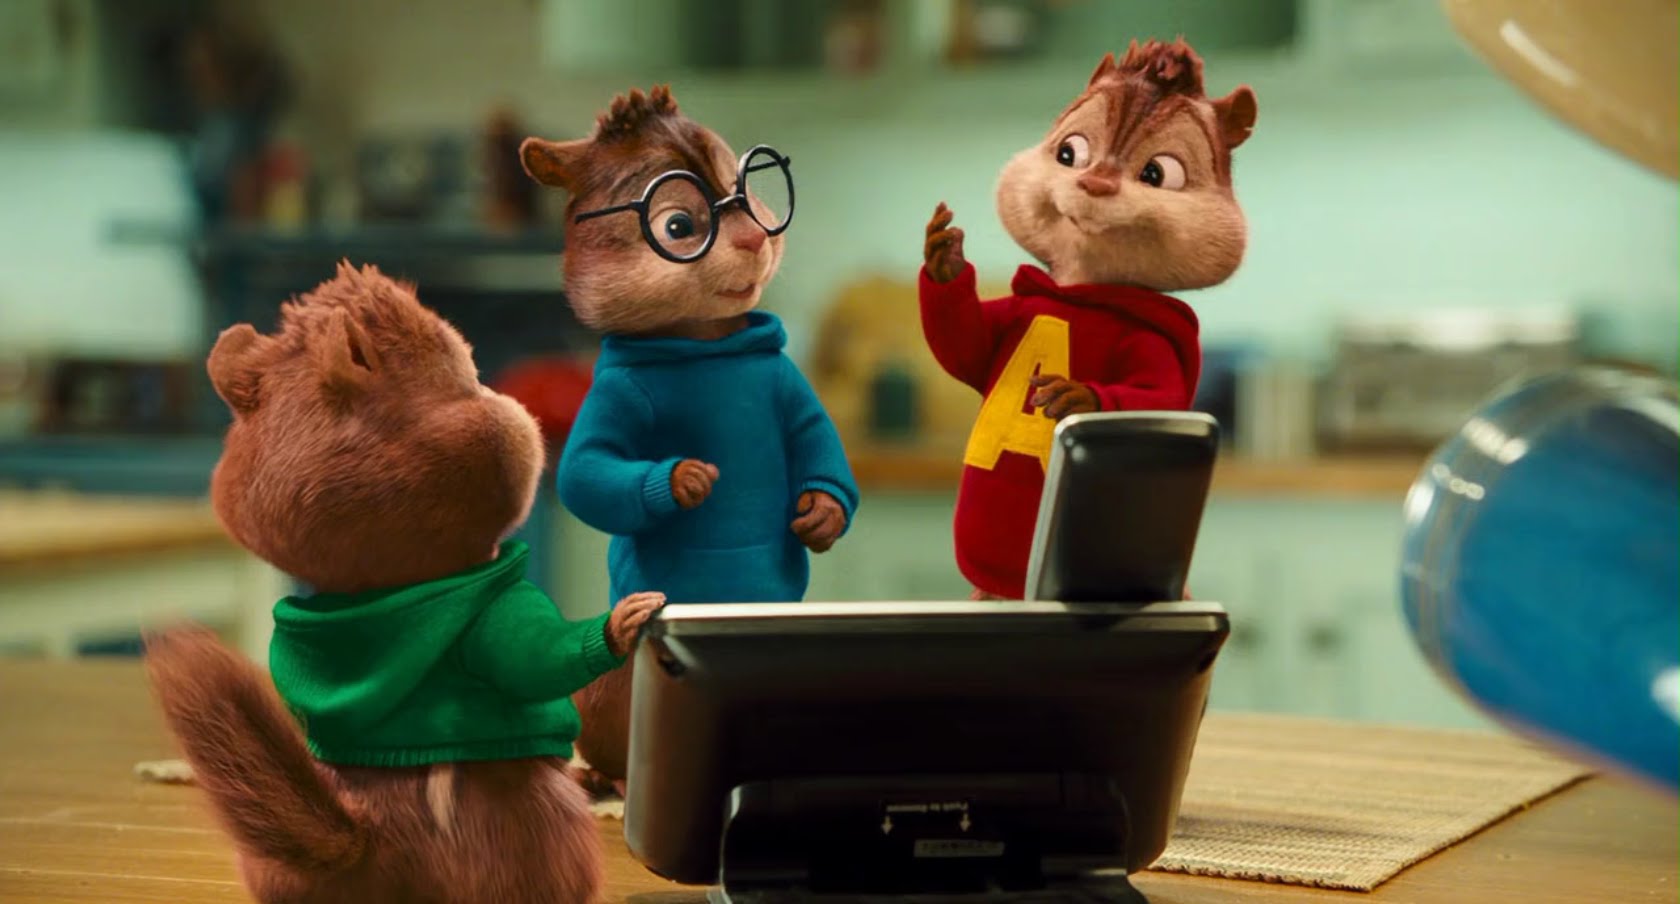 Alvin And The Chipmunks: The Squeakquel #1